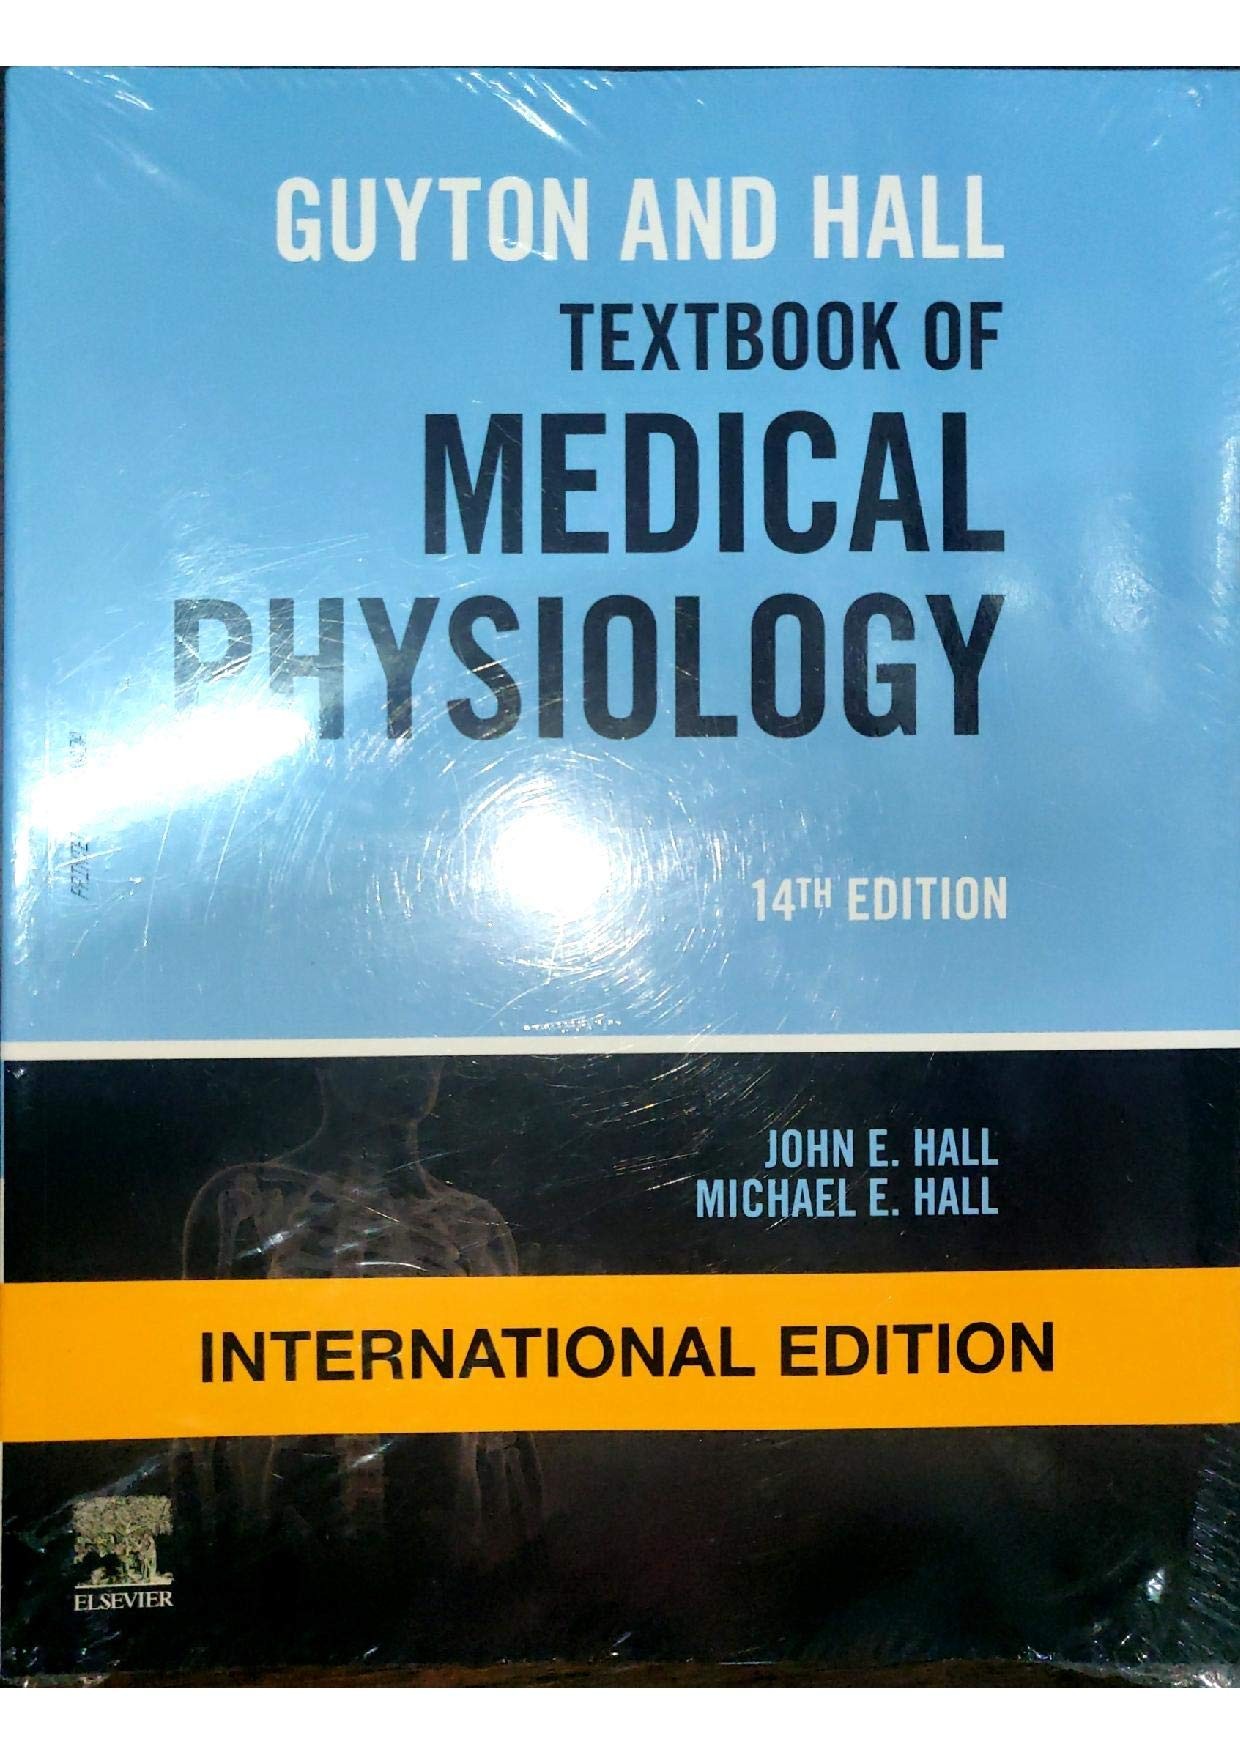 Guyton And Hall Textbook Of Medical Physiology,14 Ed. IE.